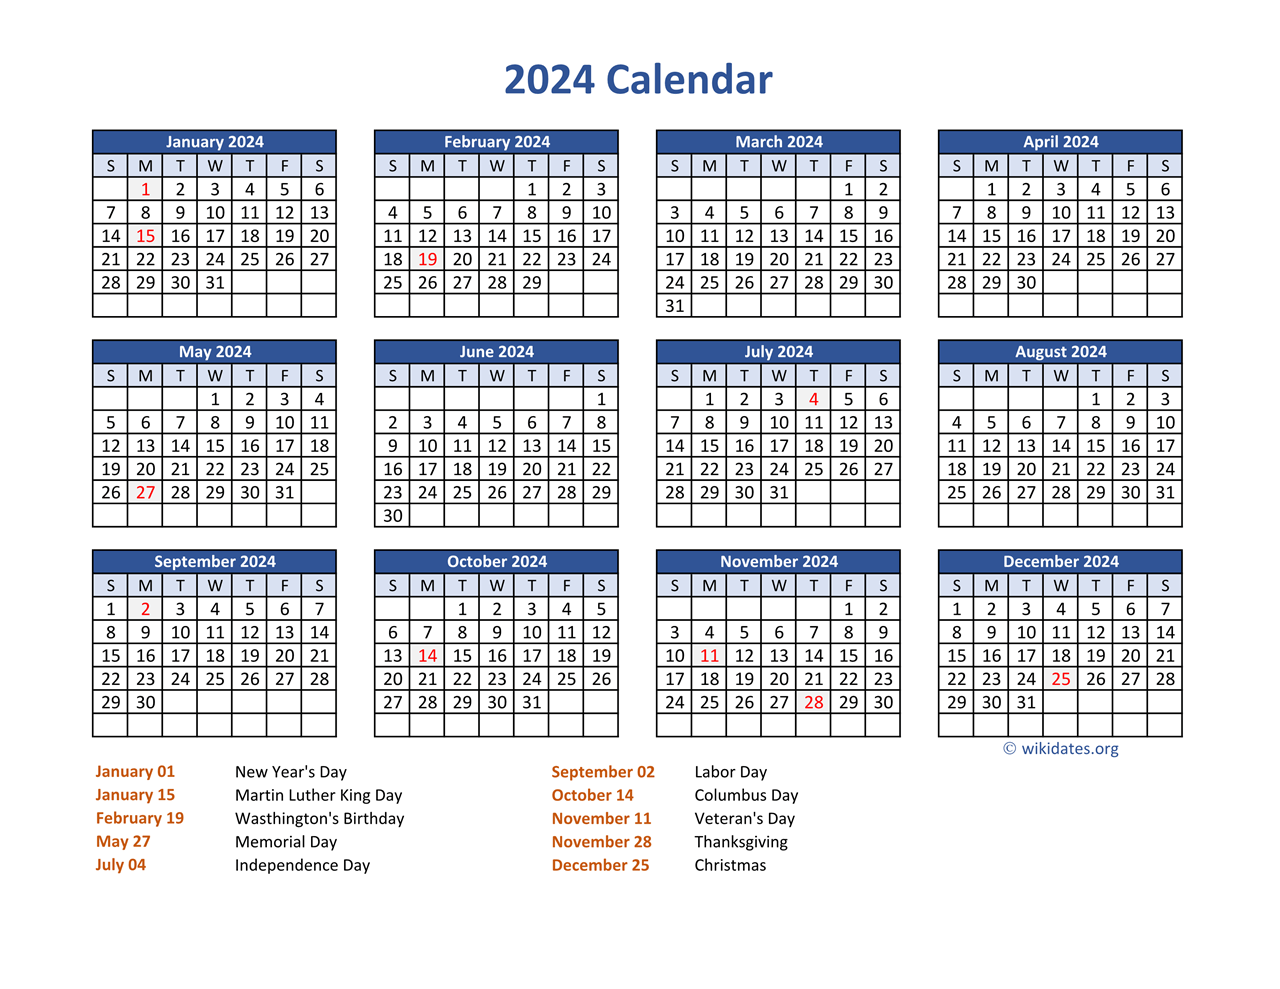 Pdf Calendar 2024 With Federal Holidays | Wikidates for 2024 Printable Calendar One Page With Holidays